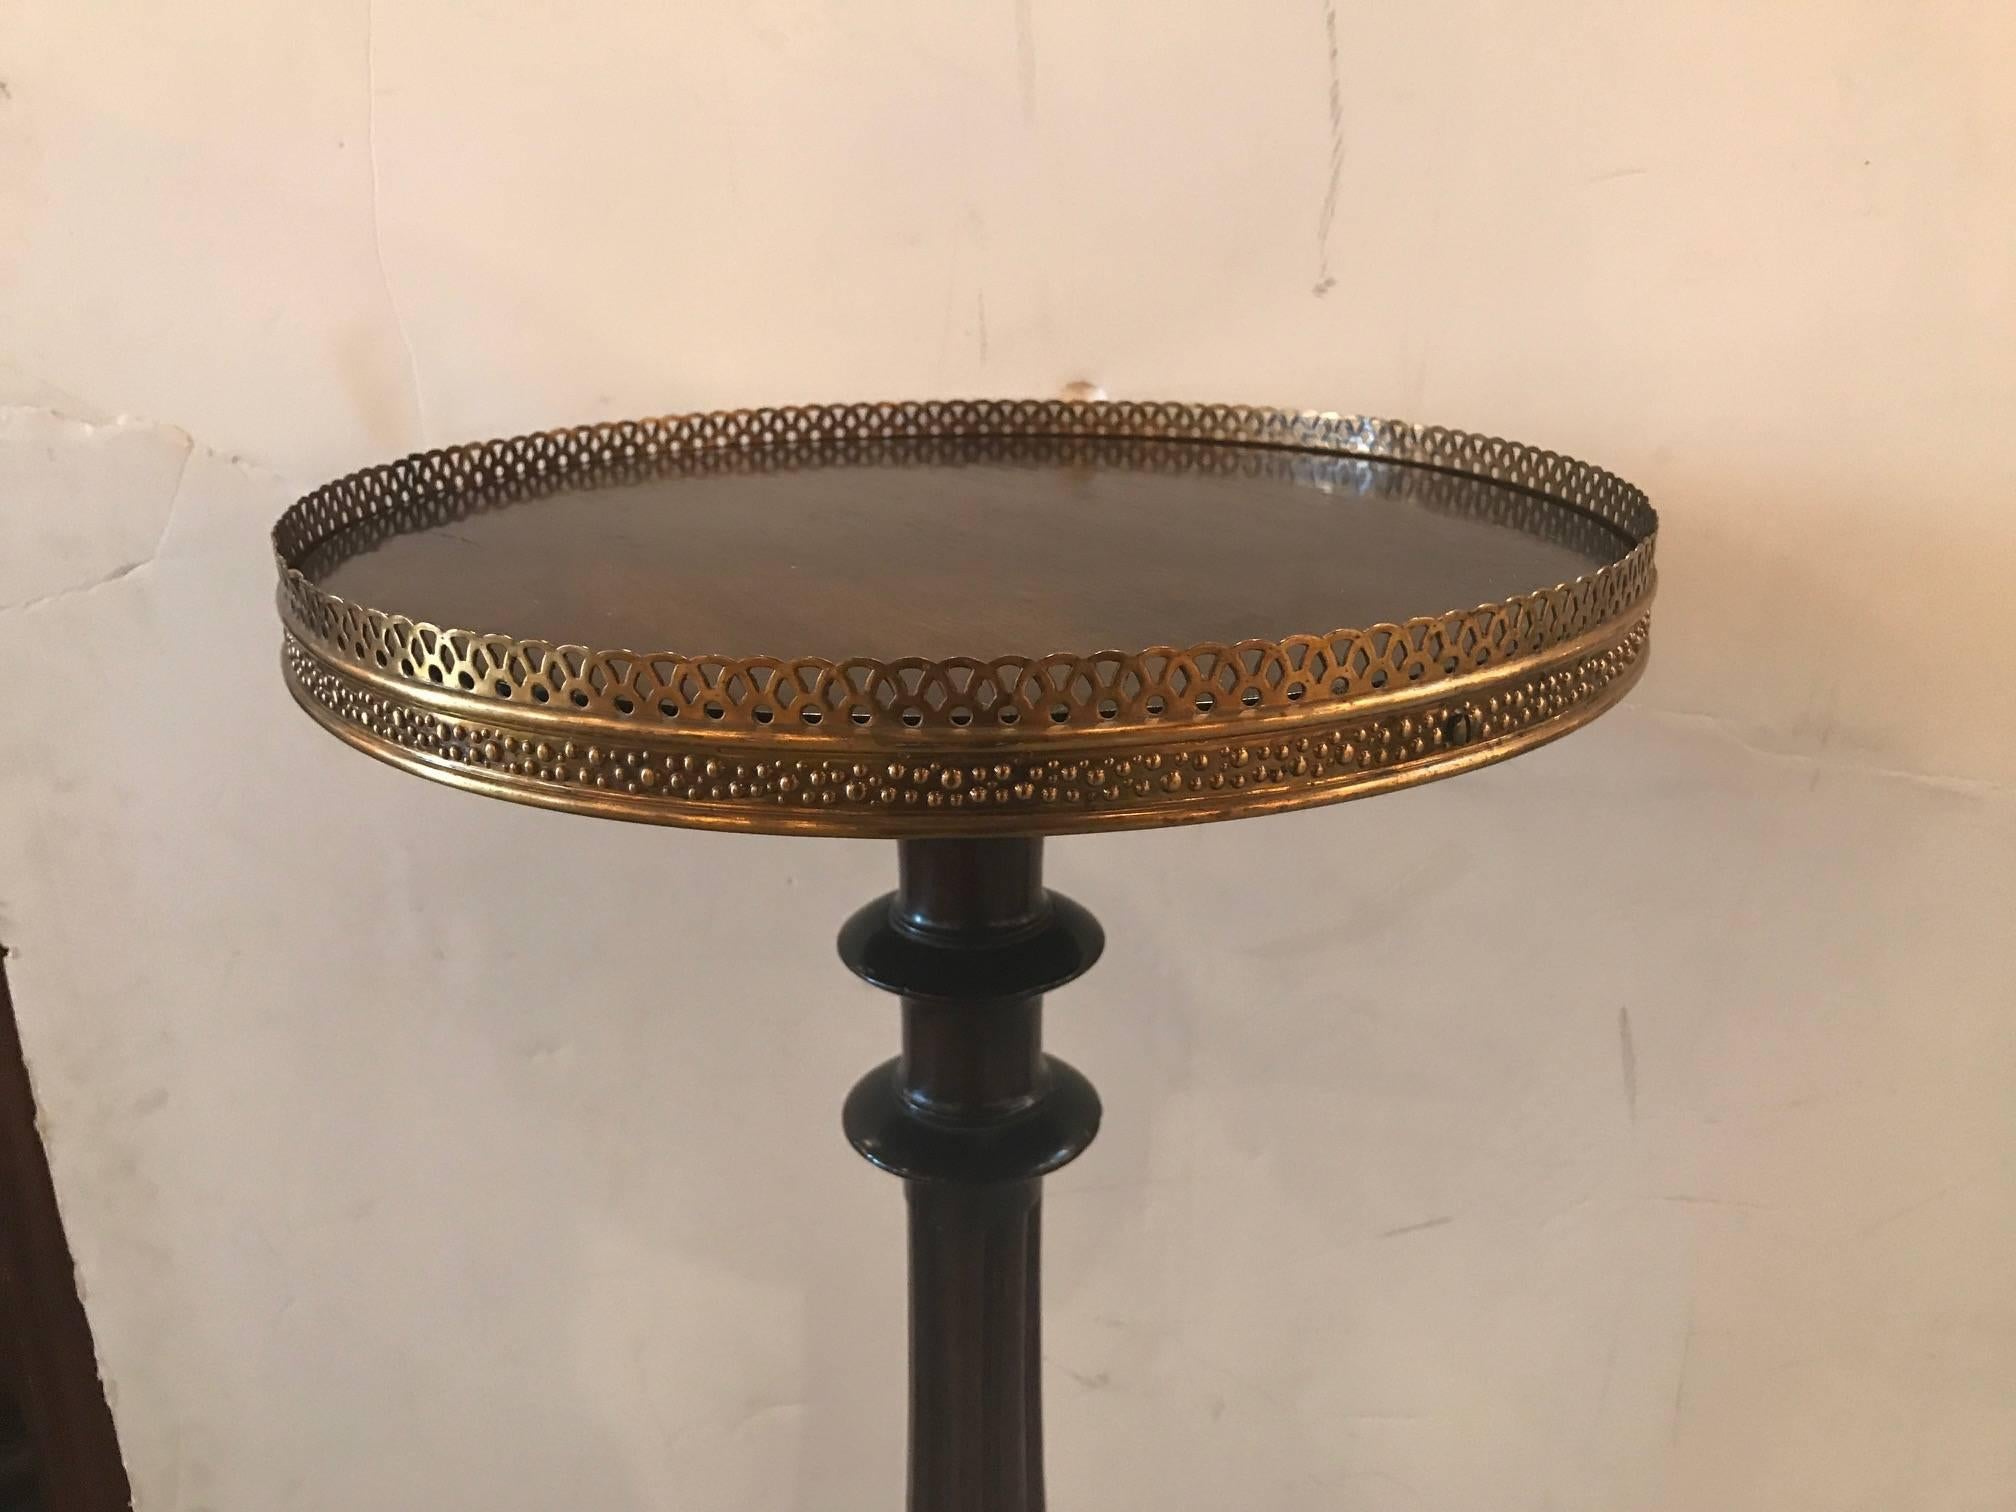 Tall mahogany pedestal fern table with pierced brass gallery edge. The shapely centre column resting on three pierced scrolling legs. Measure: The top is 14.25 inches in diameter.